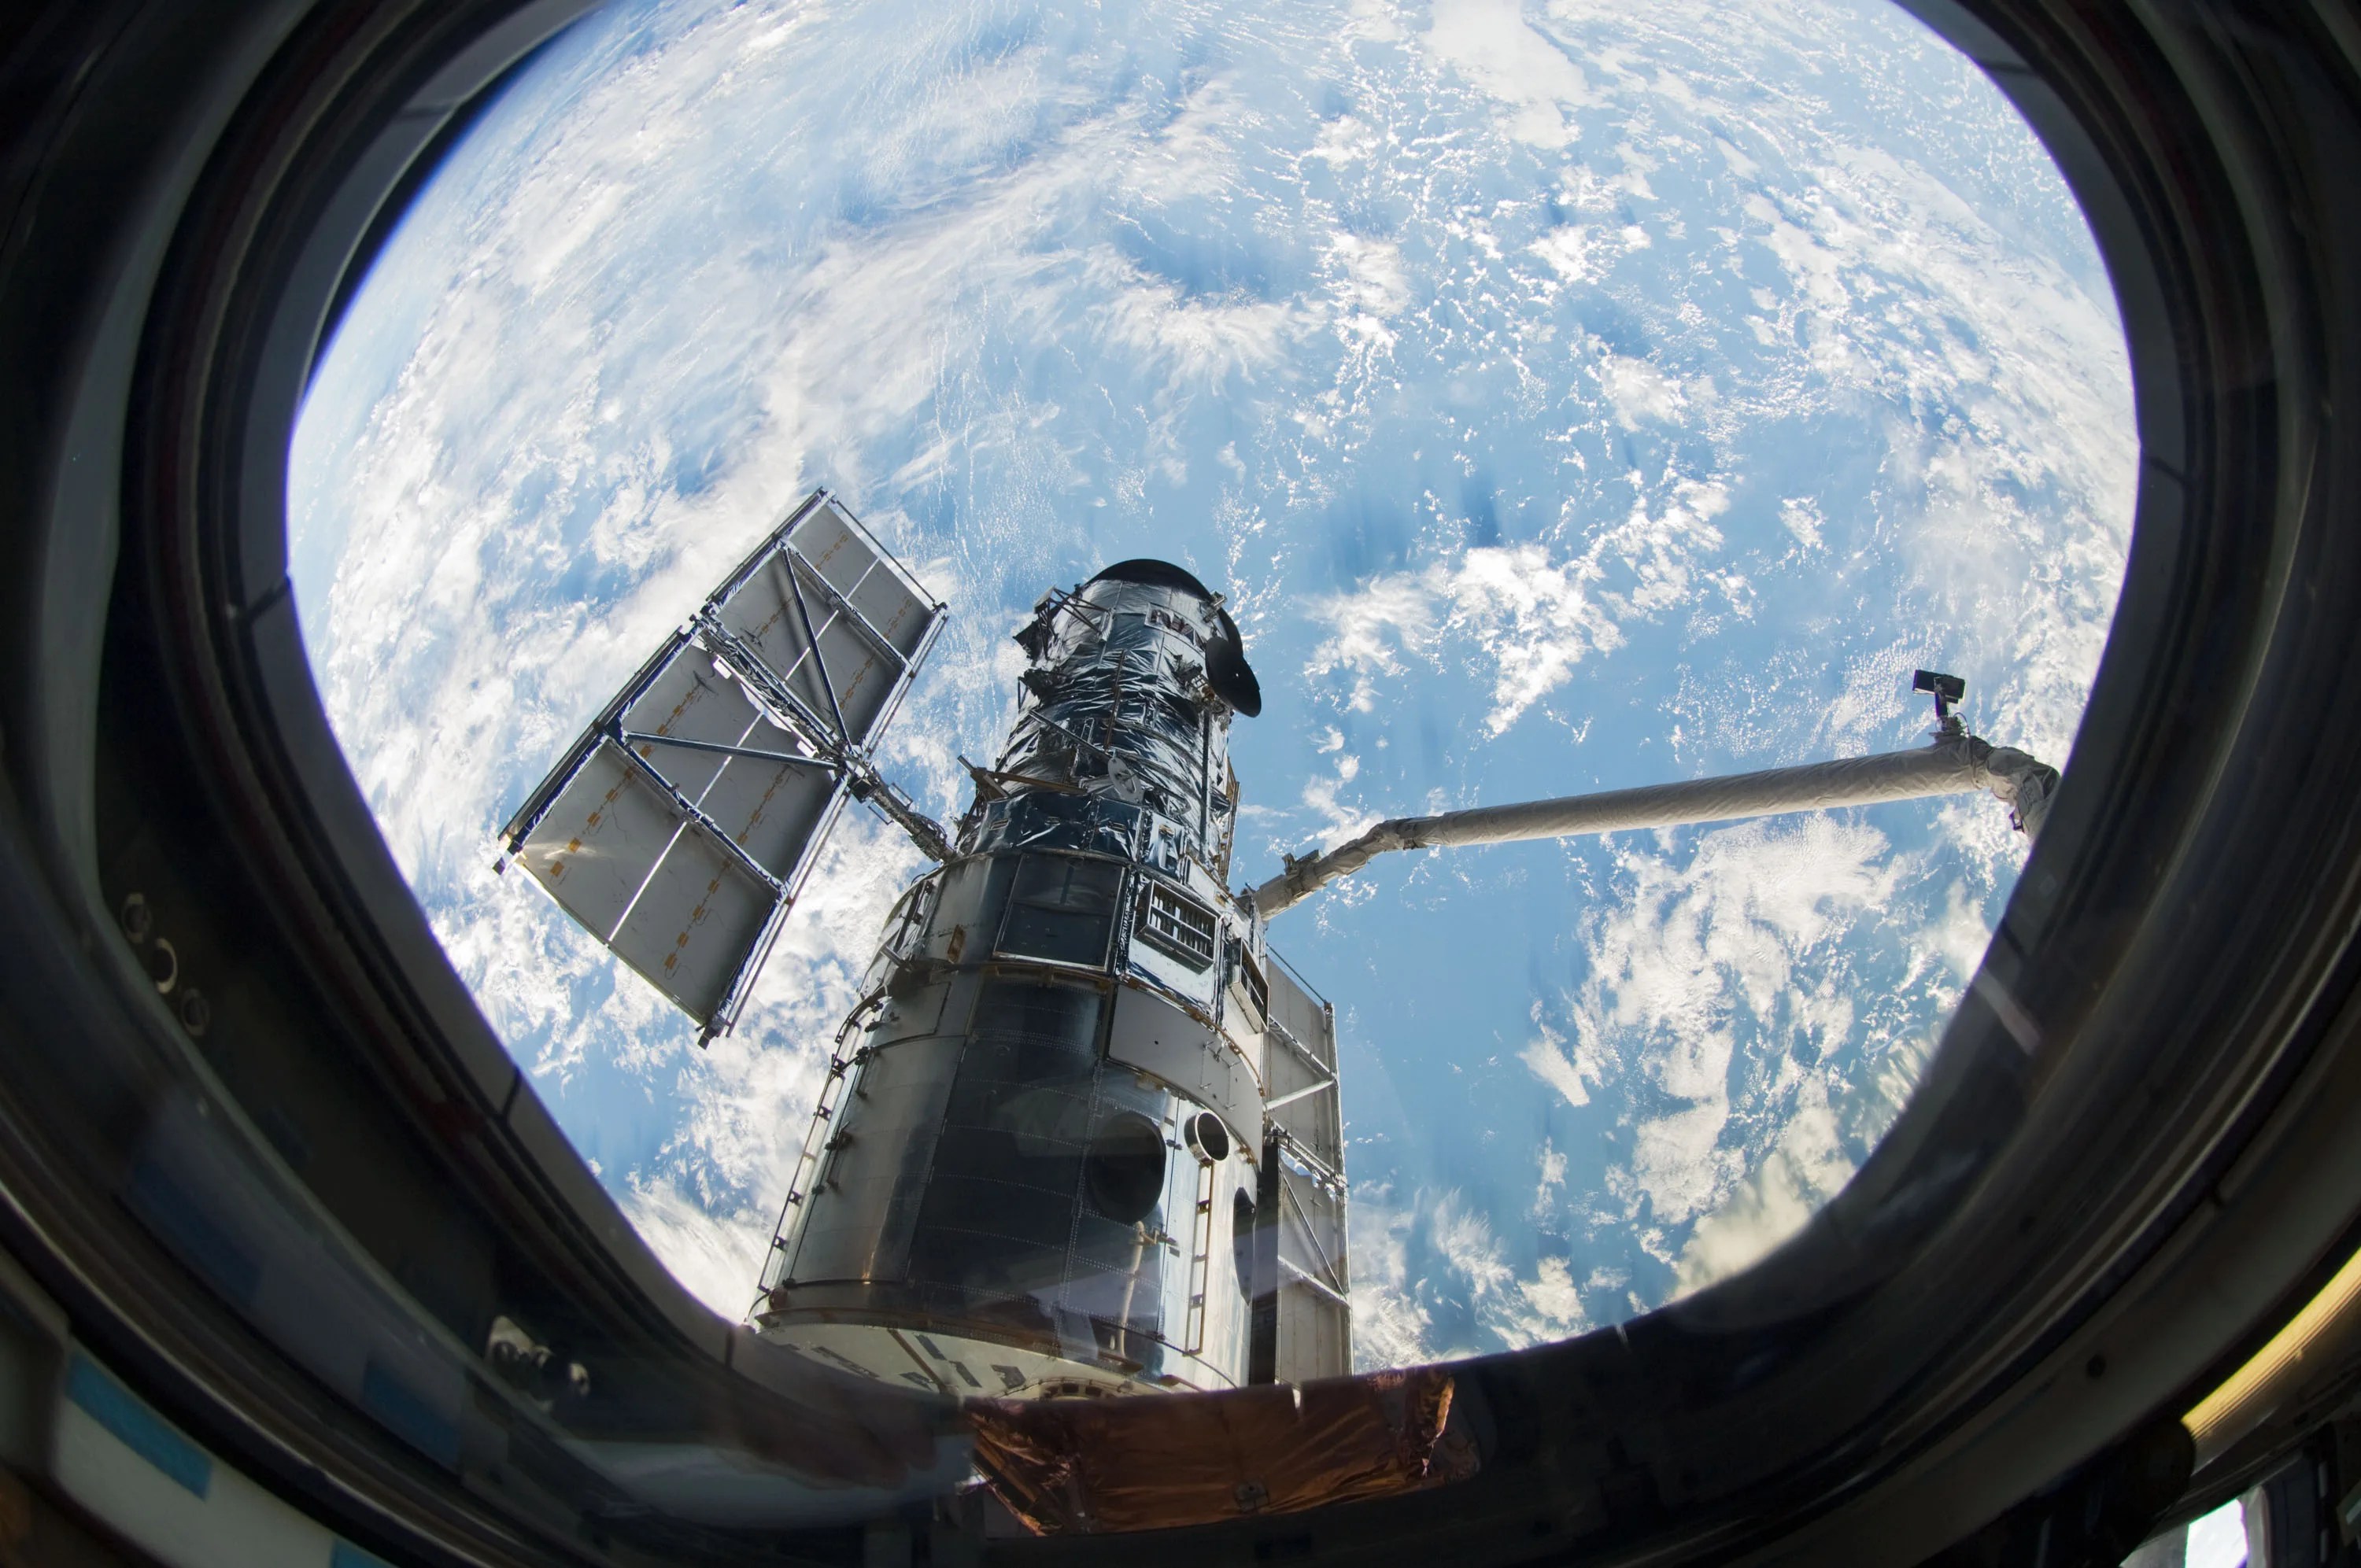 Hubble as peeped from space shuttle